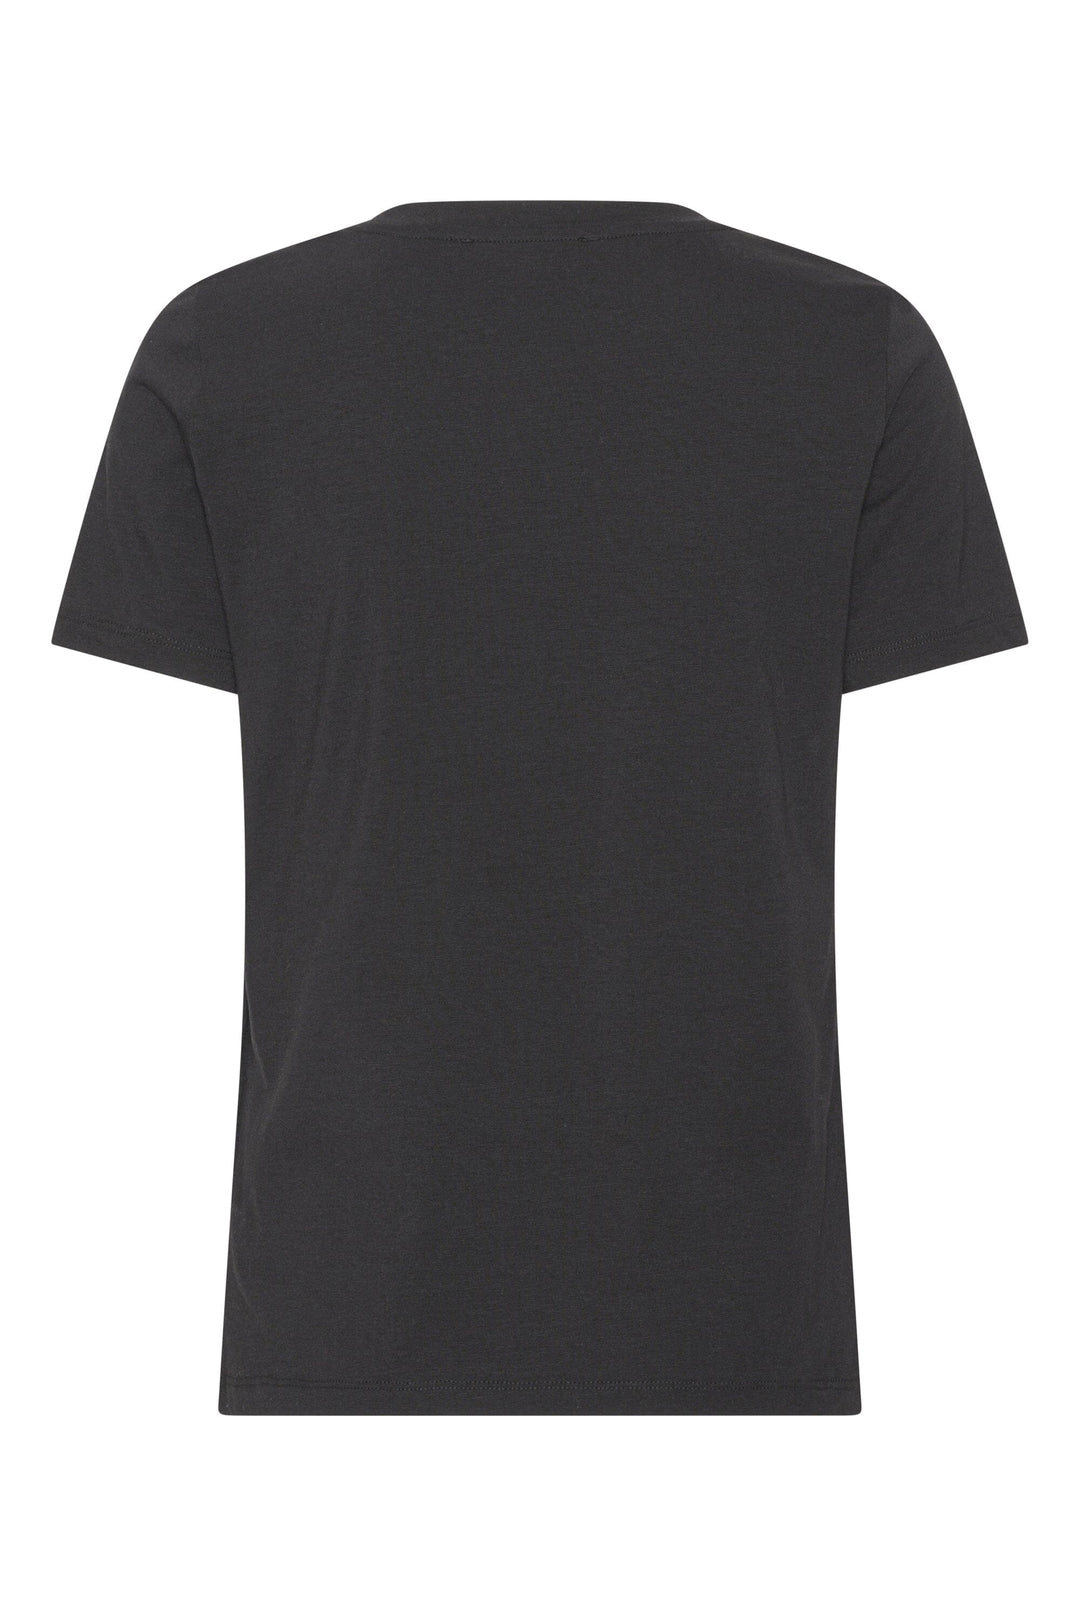 A-VIEW - Stabil Top S/S - 999 Black T-shirts 